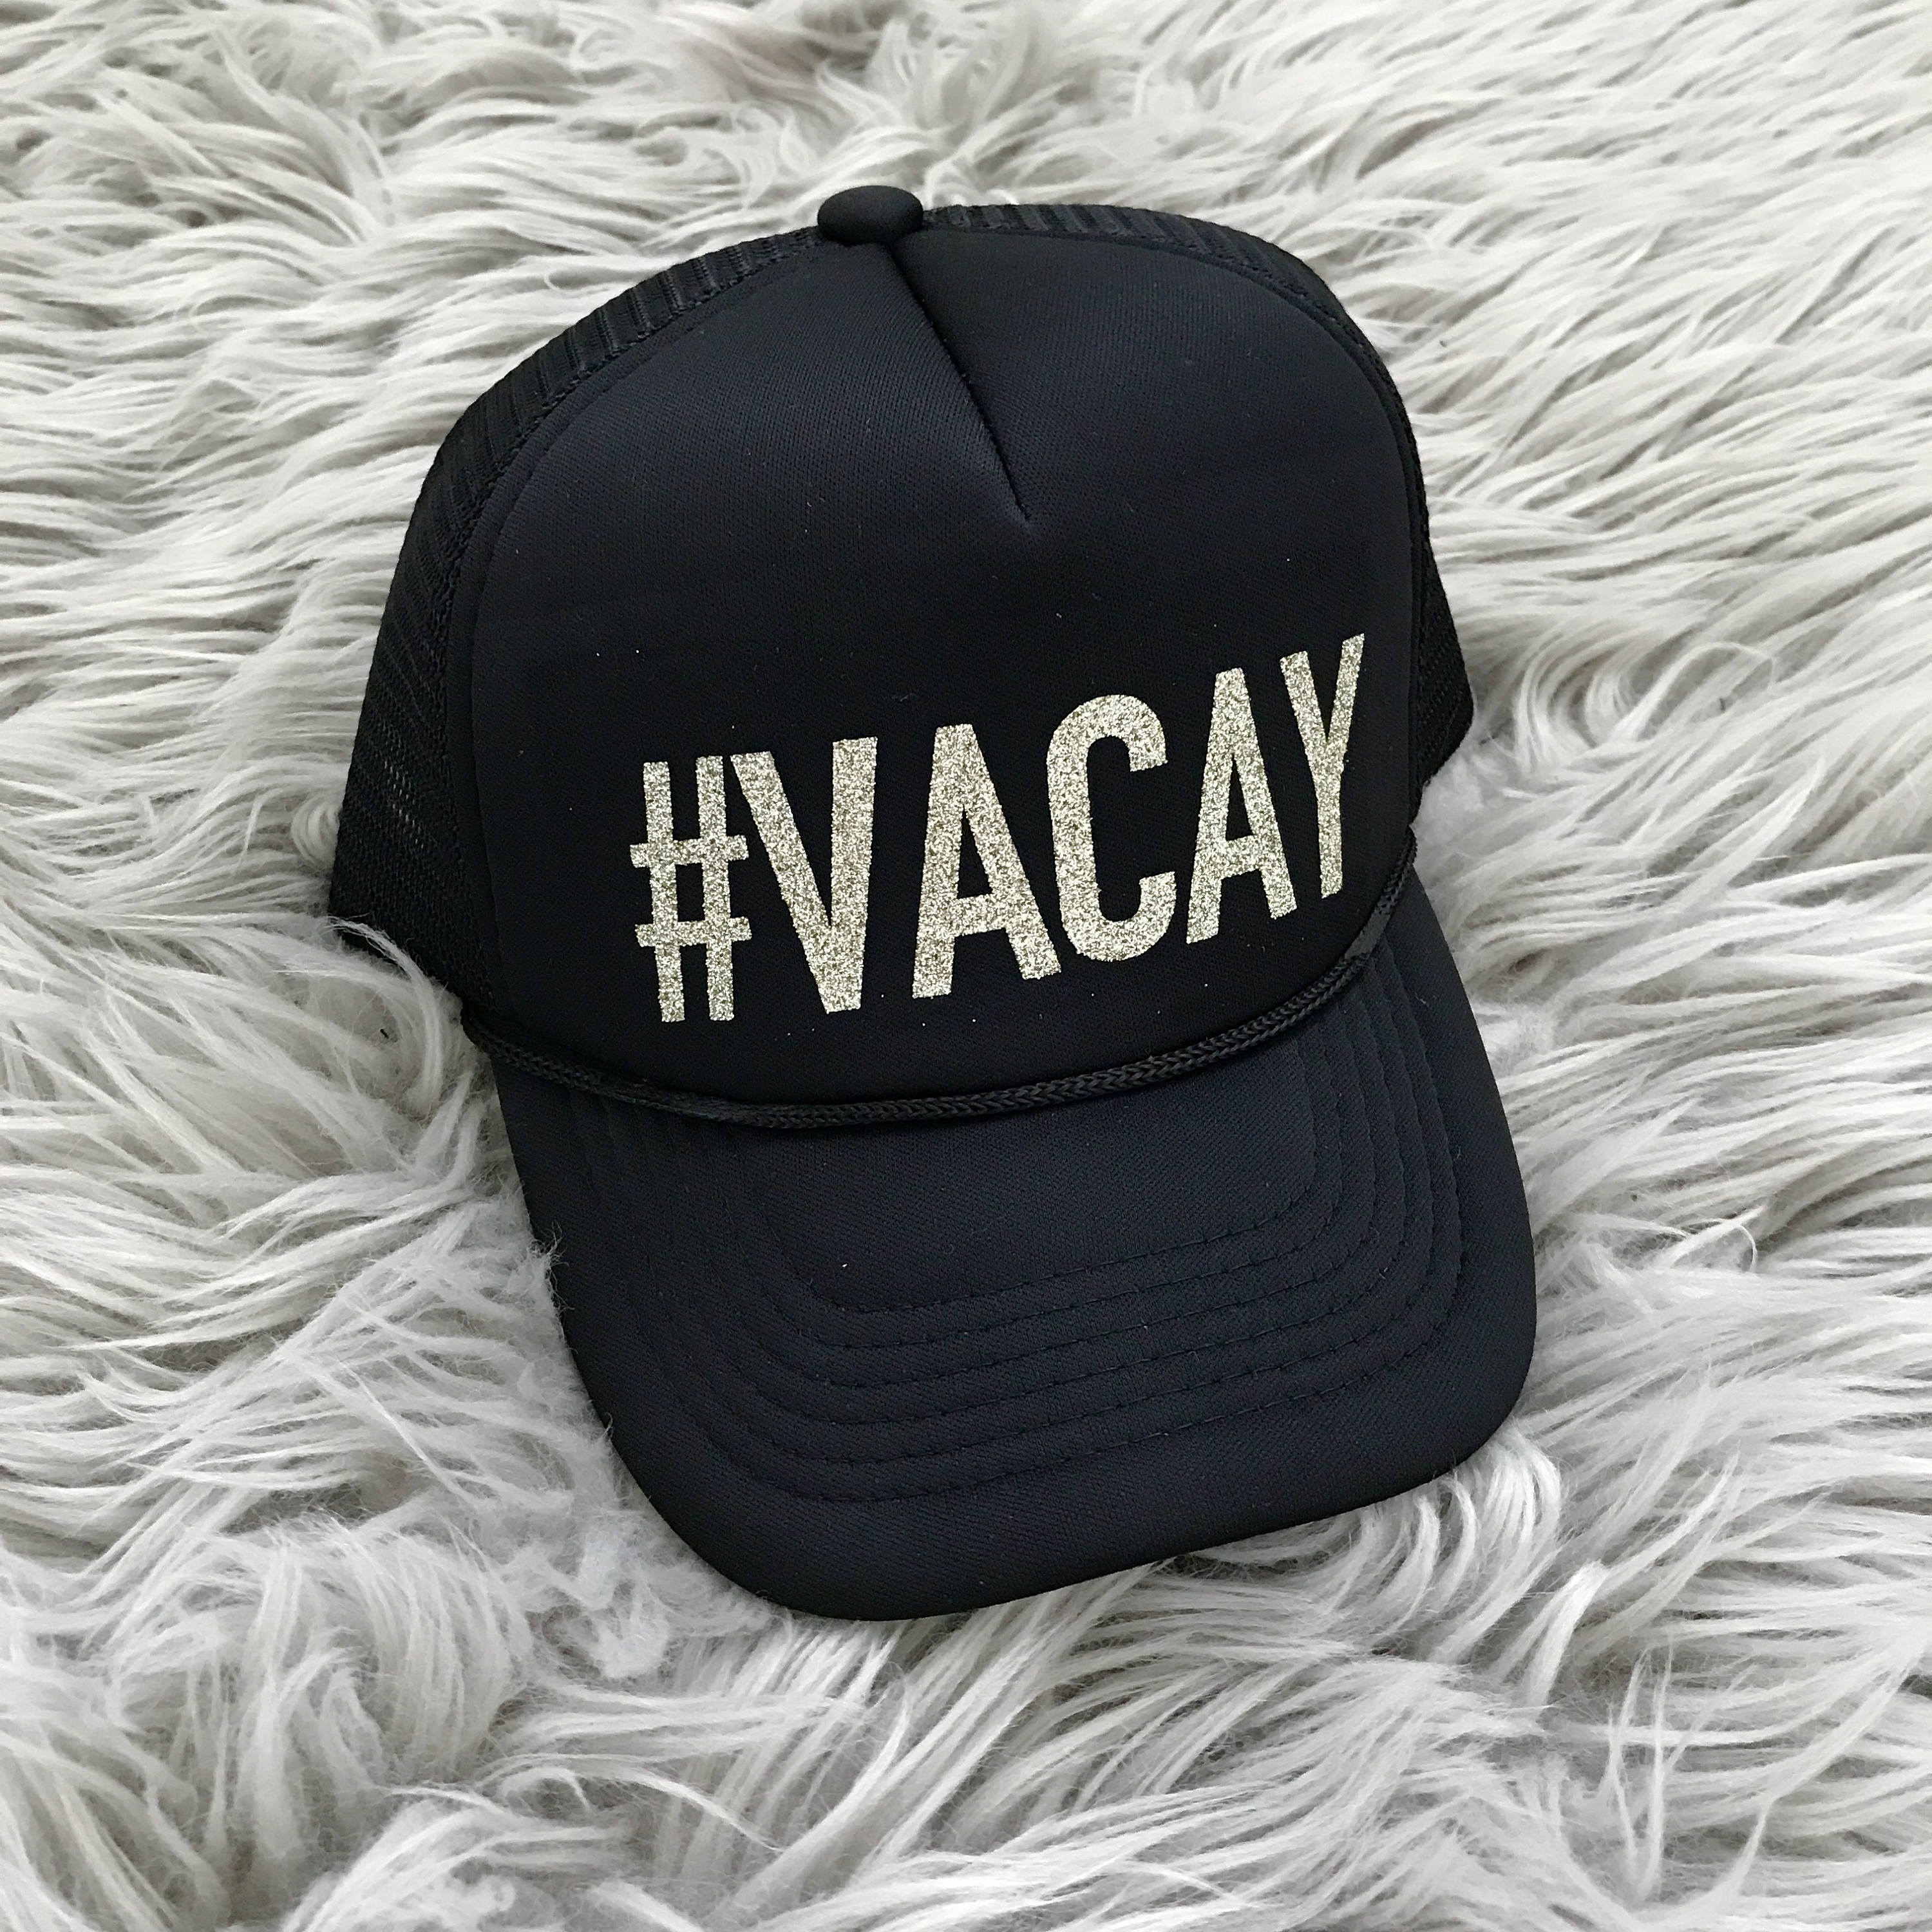 Hat #VACAY- Gold Glitter Trucker Hat  // Bachelorette Party, Bridal Shower, Bride to be, bride tribe, Pink glitter